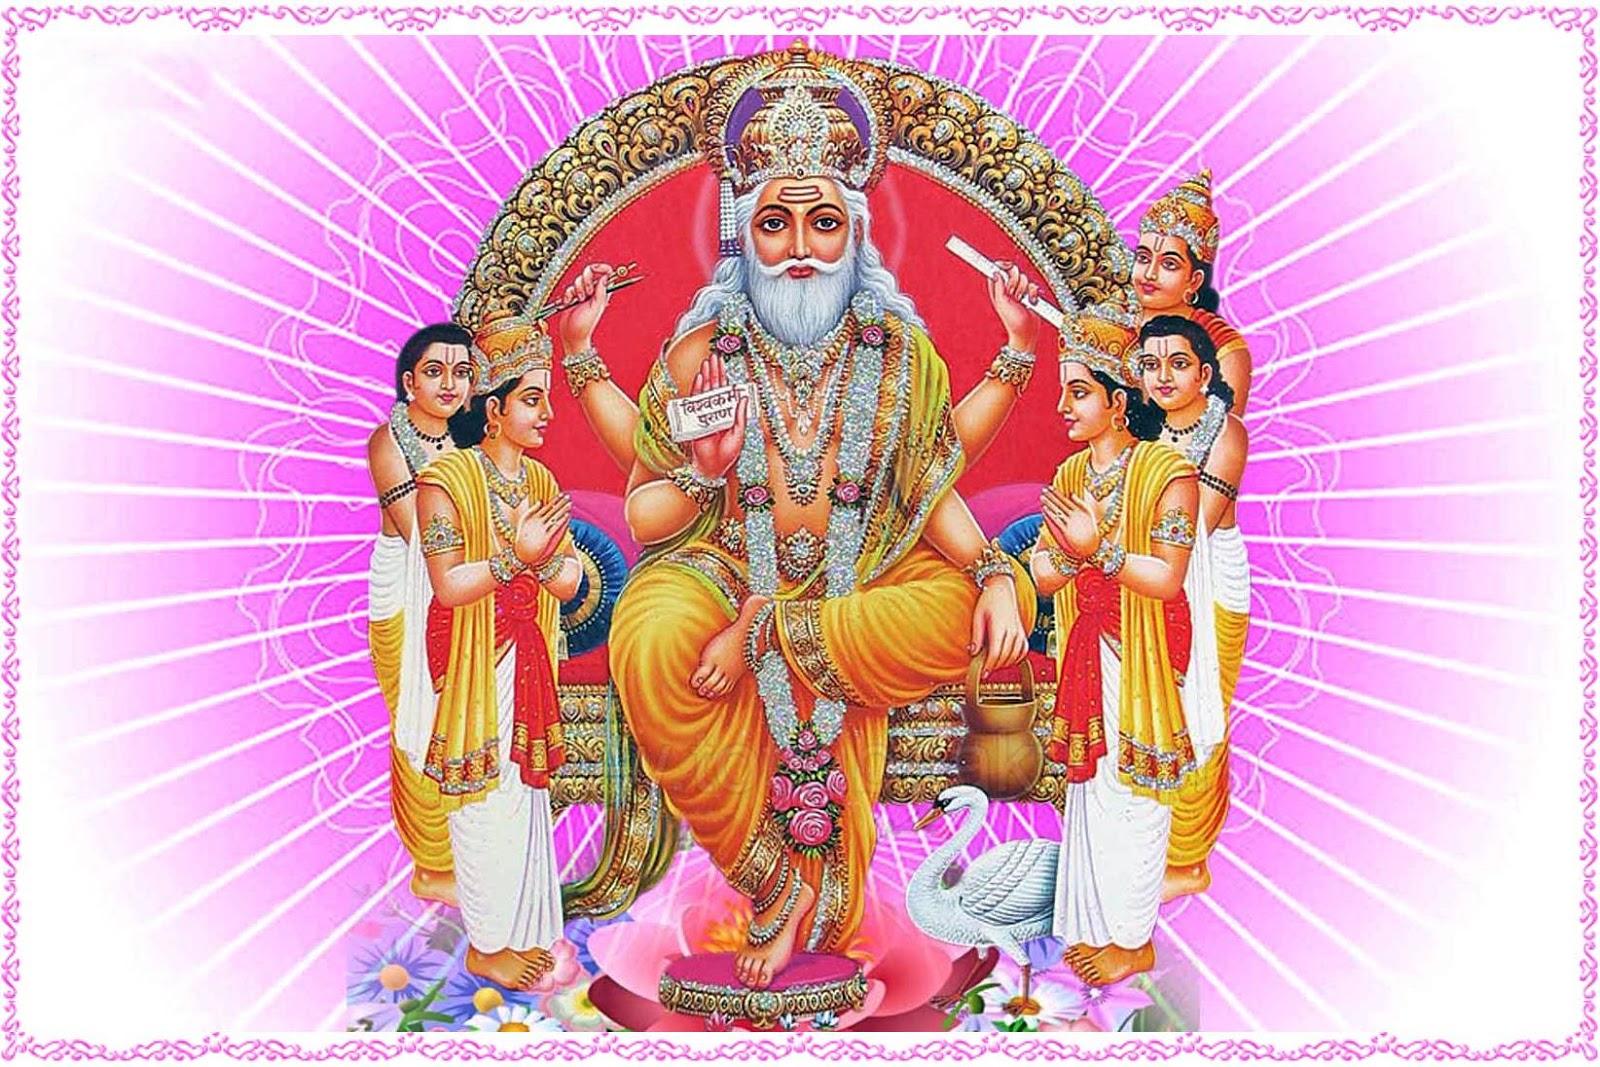 happy vishwakarma day jayanti puja wishes HD wallpapers pictures photos images free download